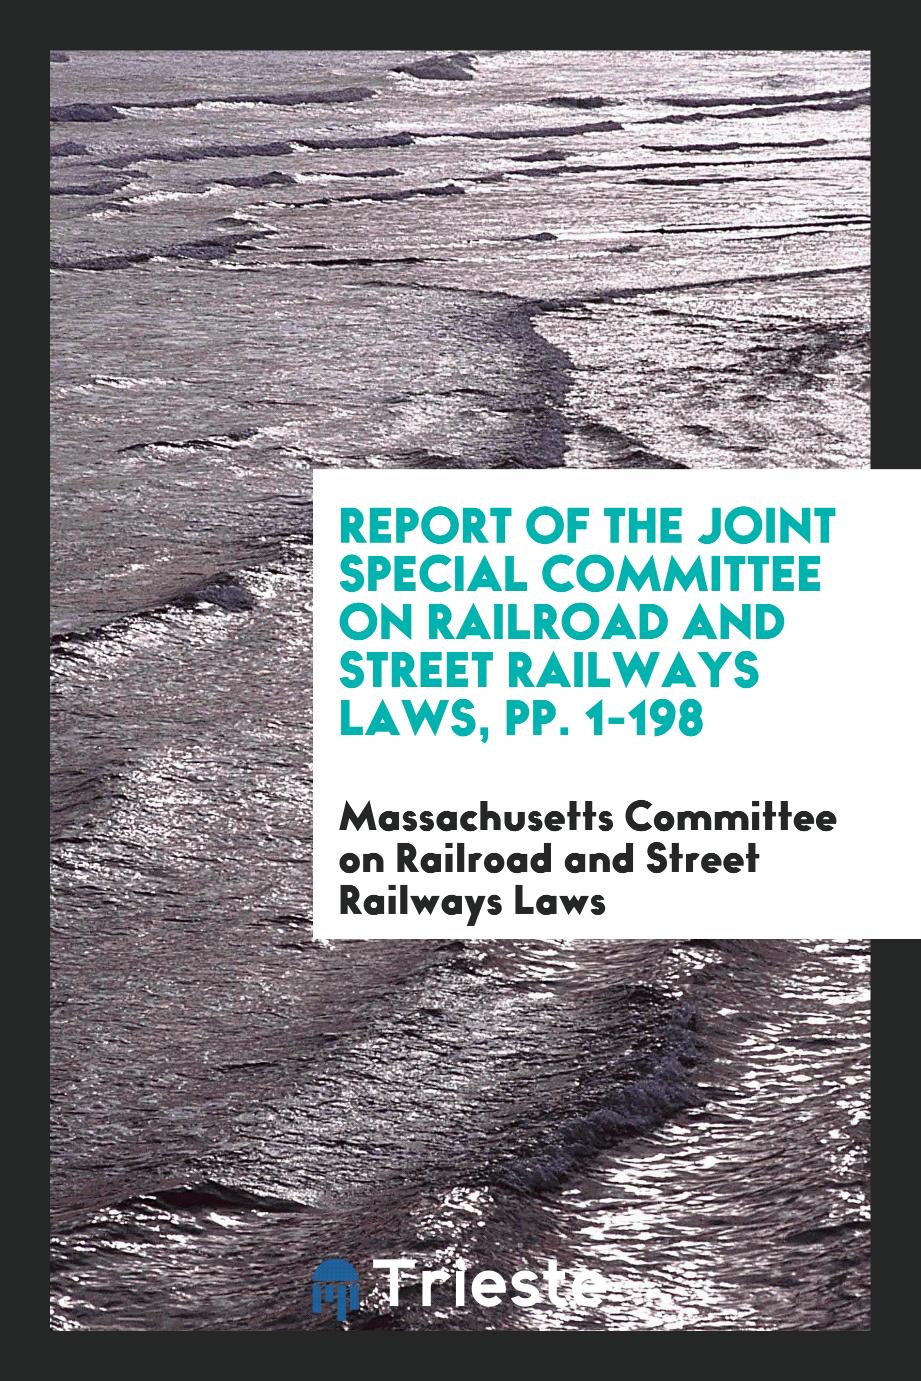 Report of the Joint Special Committee on Railroad and Street Railways Laws, pp. 1-198